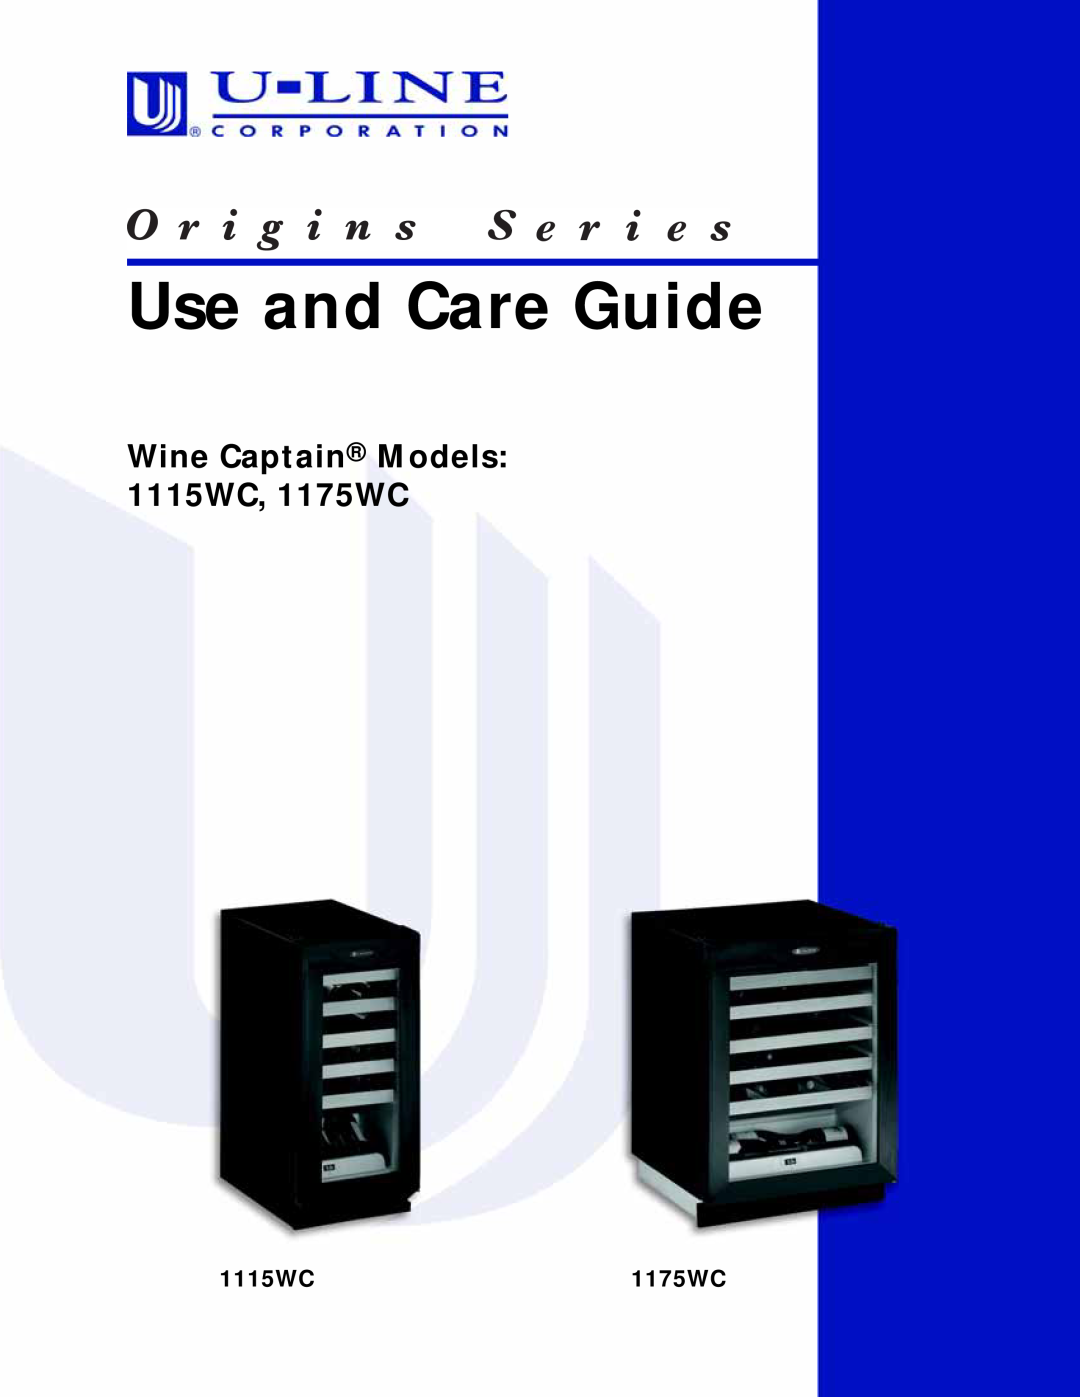 U-Line manual Use and Care Guide, Wine Captain Models 1115WC, 1175WC 